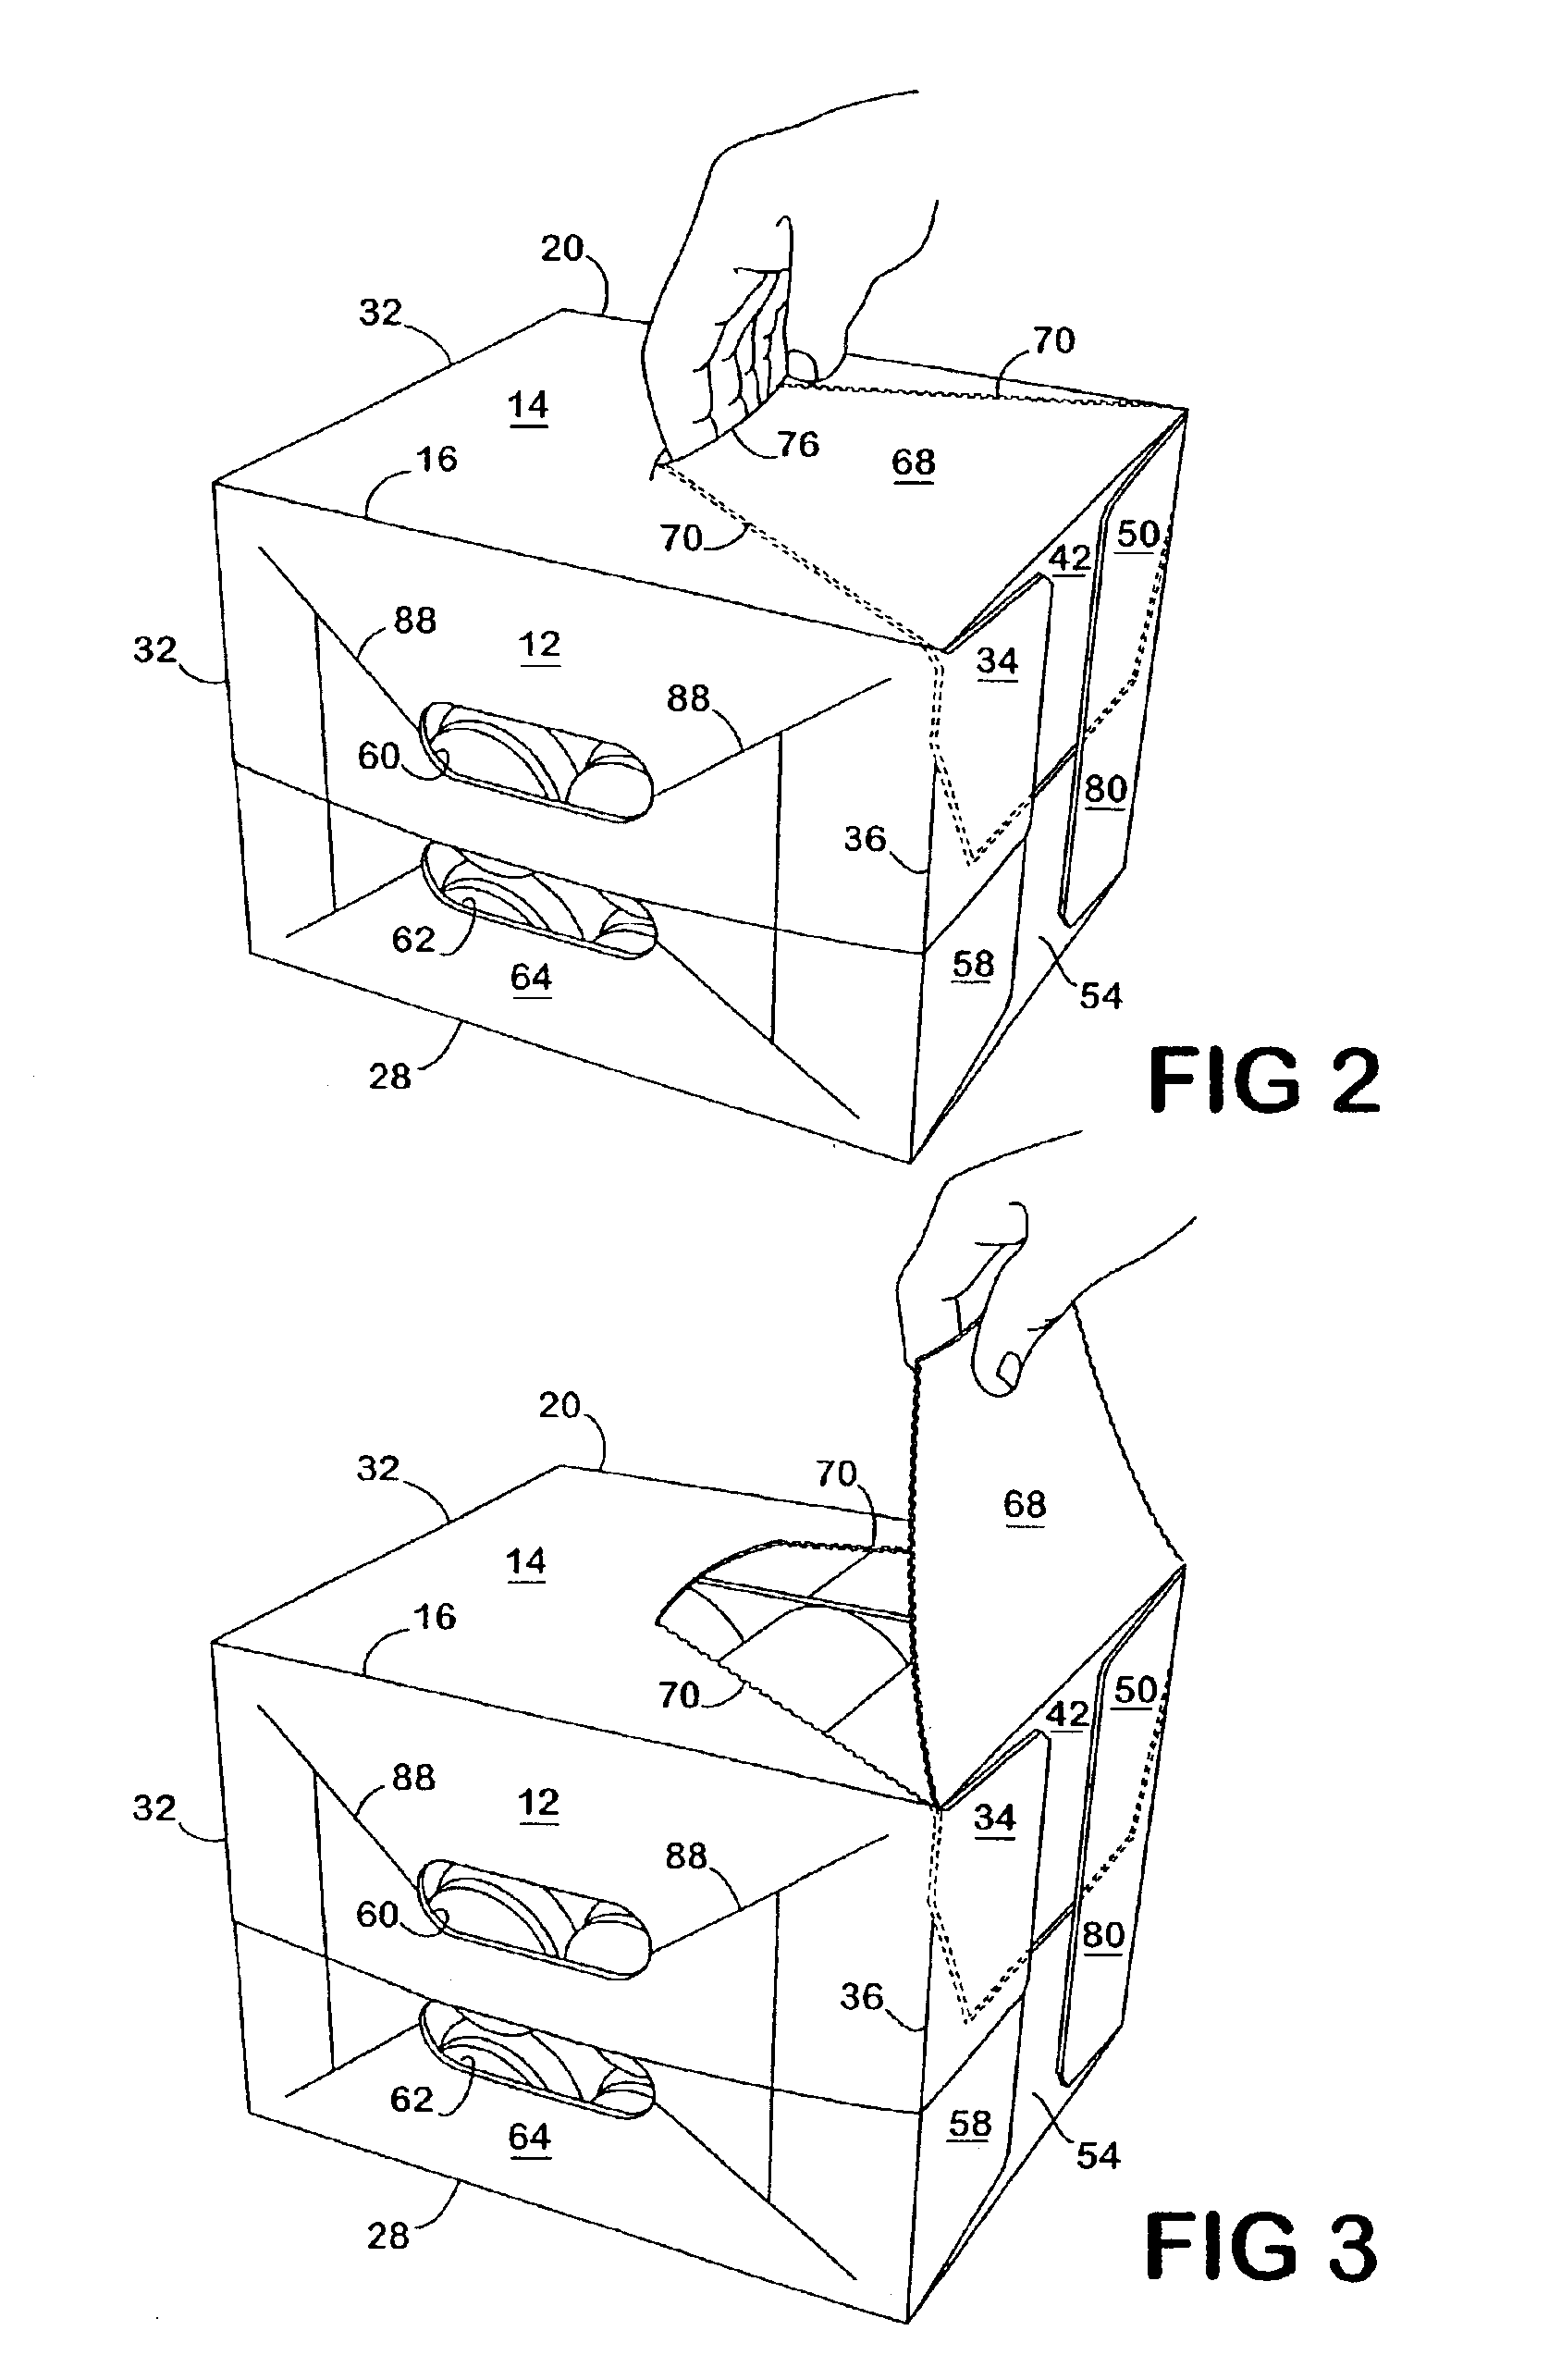 Dispensing system for double stack carton